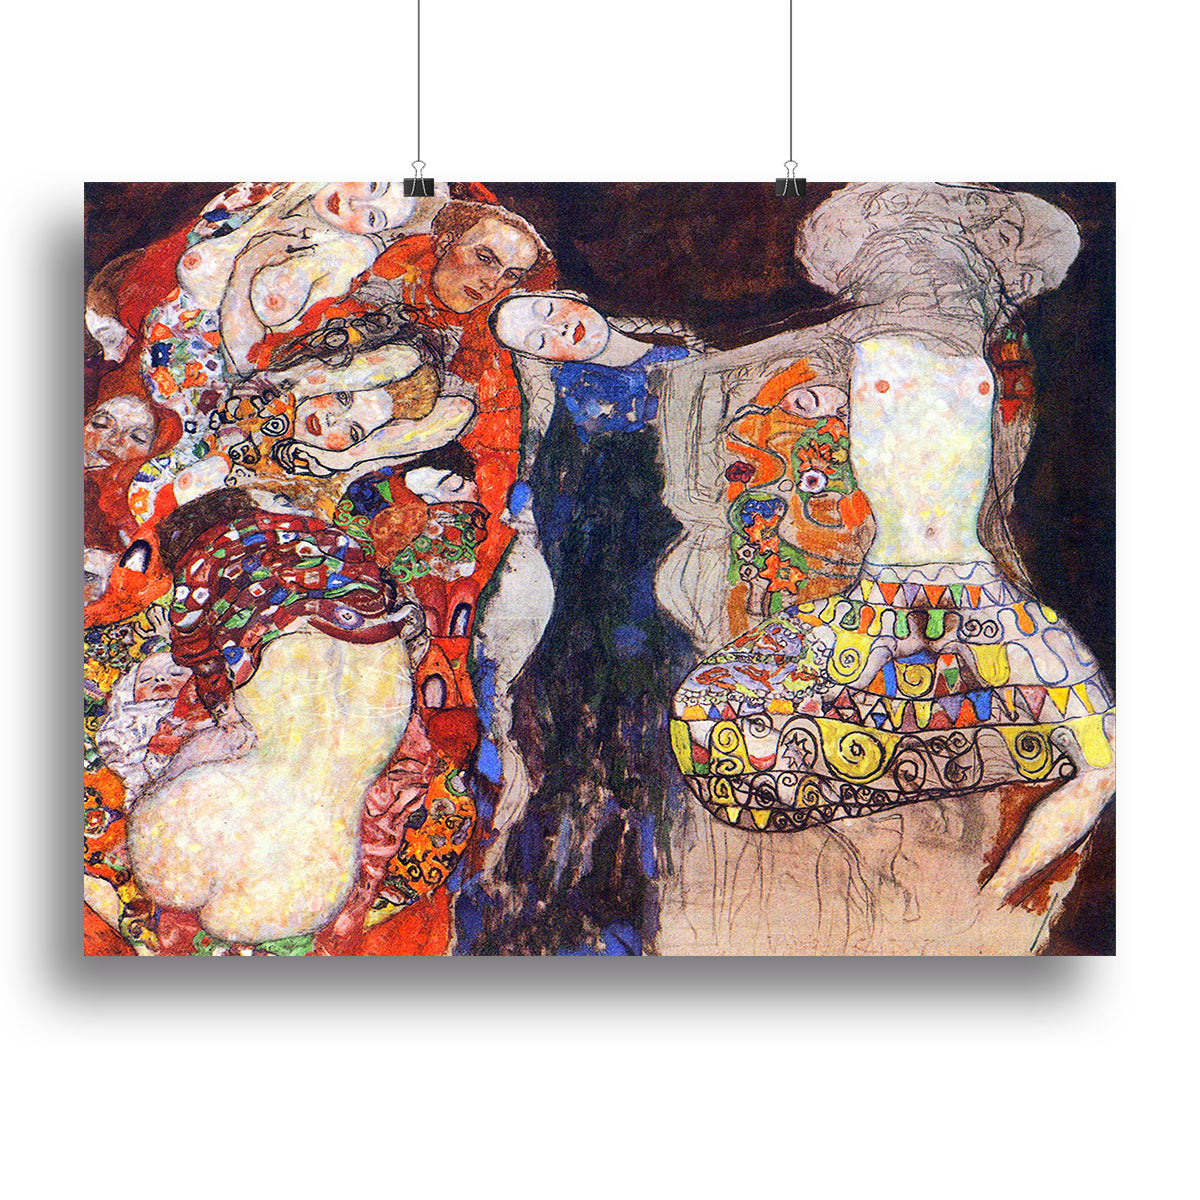 adorn the bride with veil and wreath by Klimt Canvas Print or Poster - Canvas Art Rocks - 2